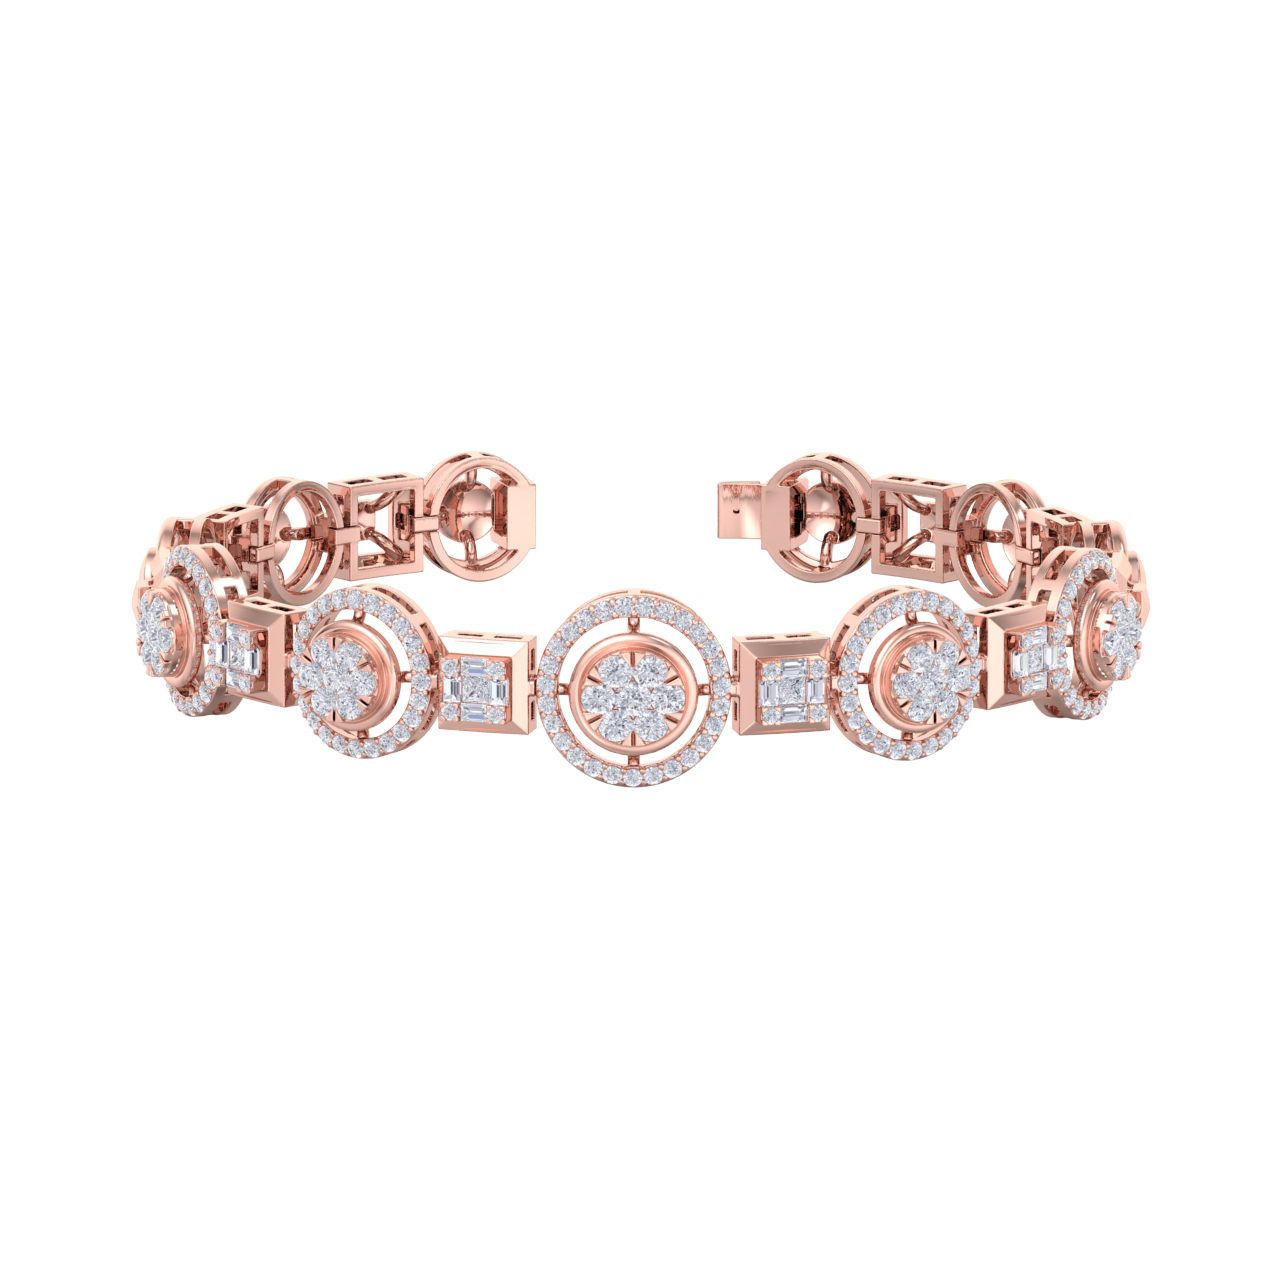 Statement bracelet in rose gold with white diamonds of 1.92 ct in weight